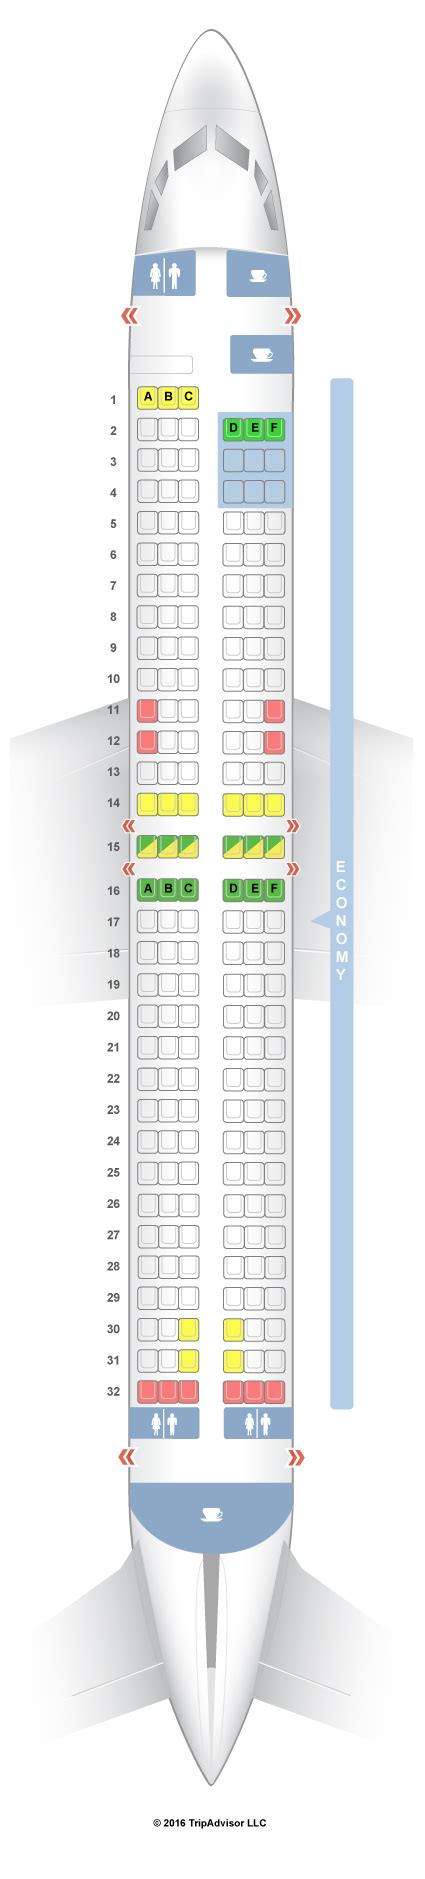 Boeing Seating Chart Seat Map And Seating Chart Boeing